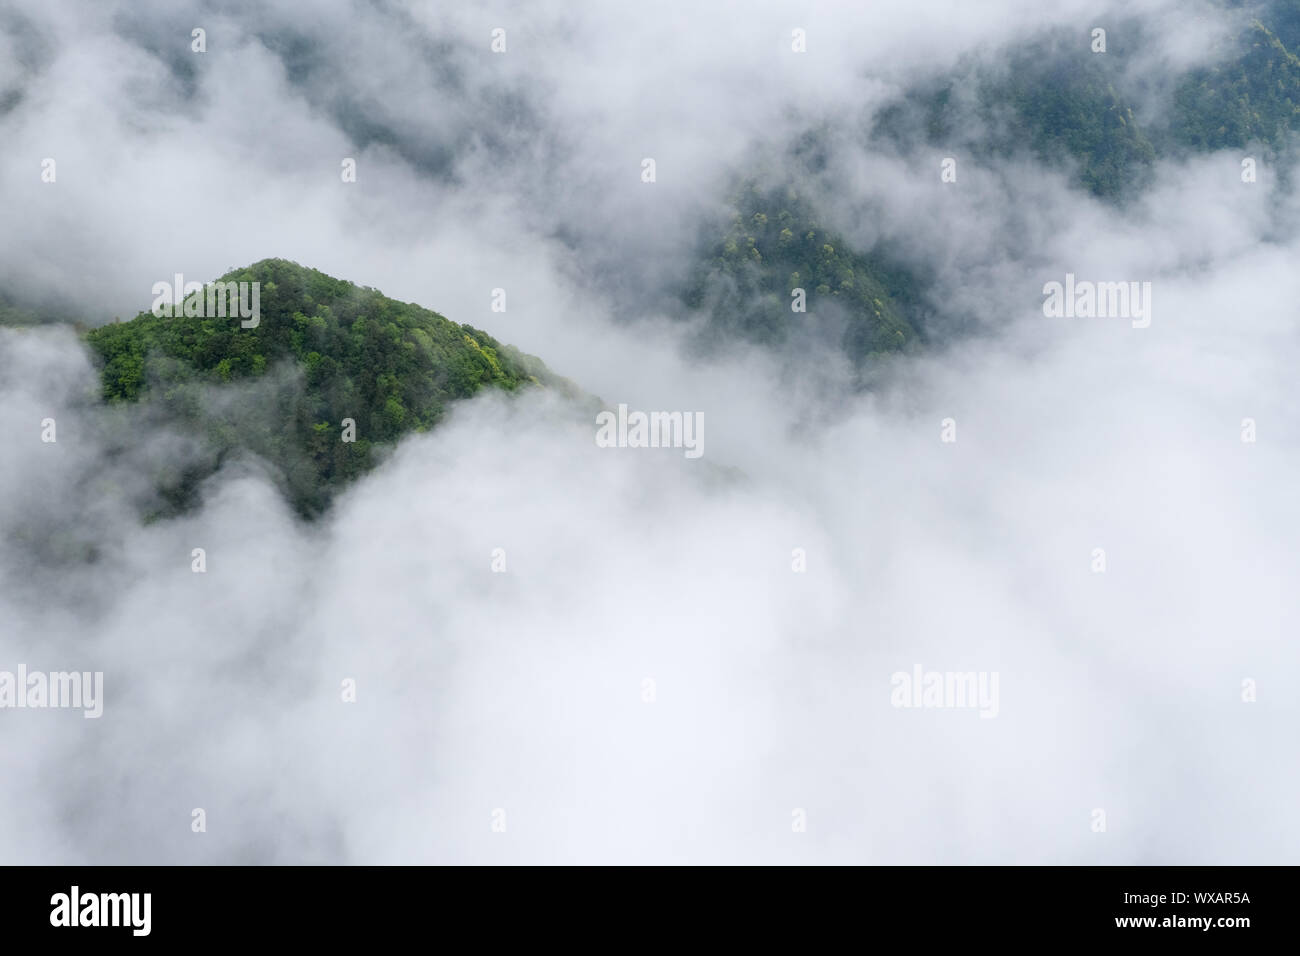 mountain forest in cloud mist Stock Photo